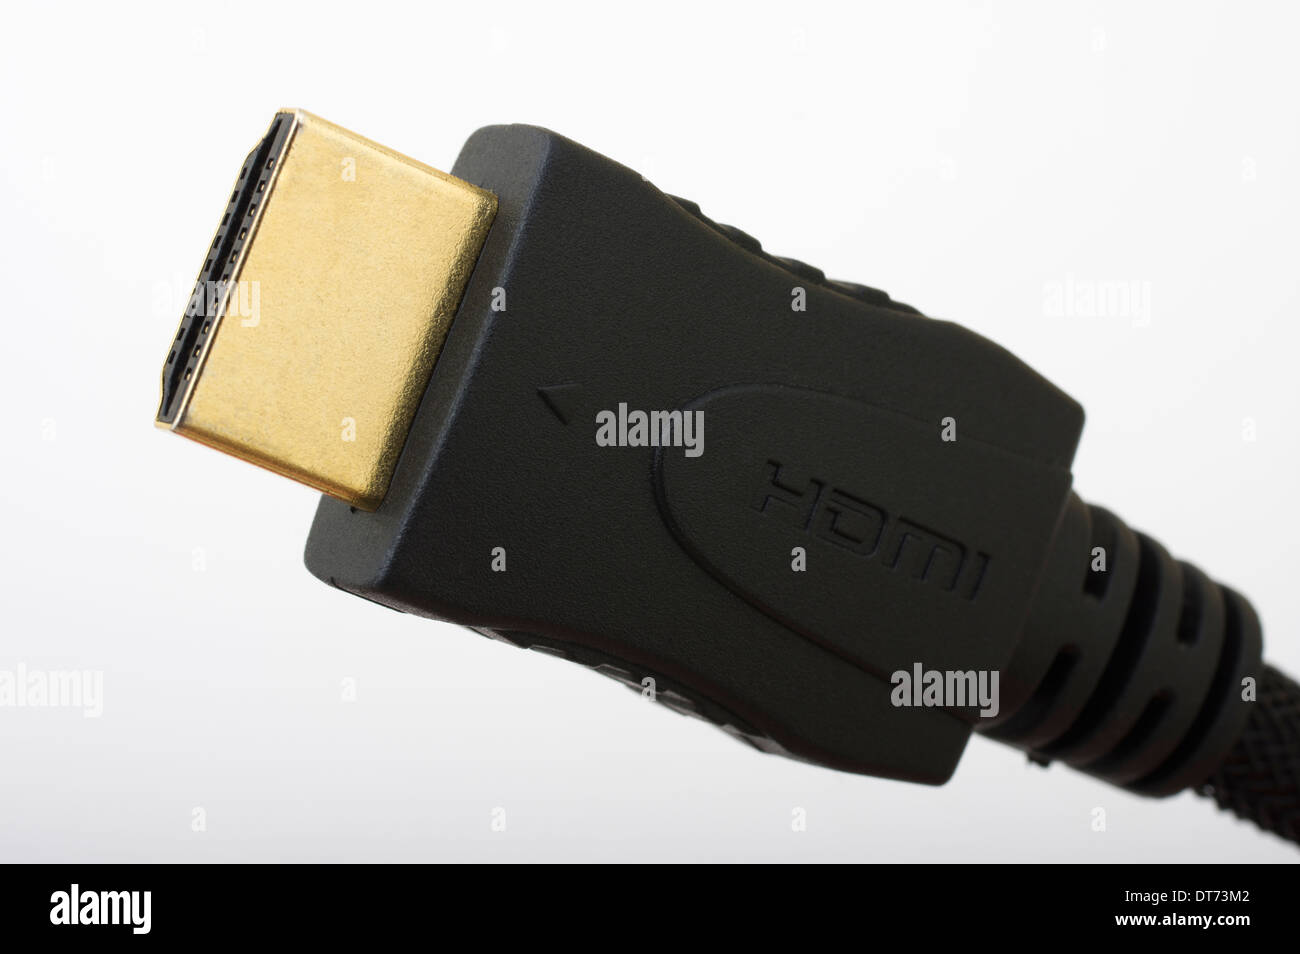 gold plated HDMI connector cable ( Male ) Stock Photo